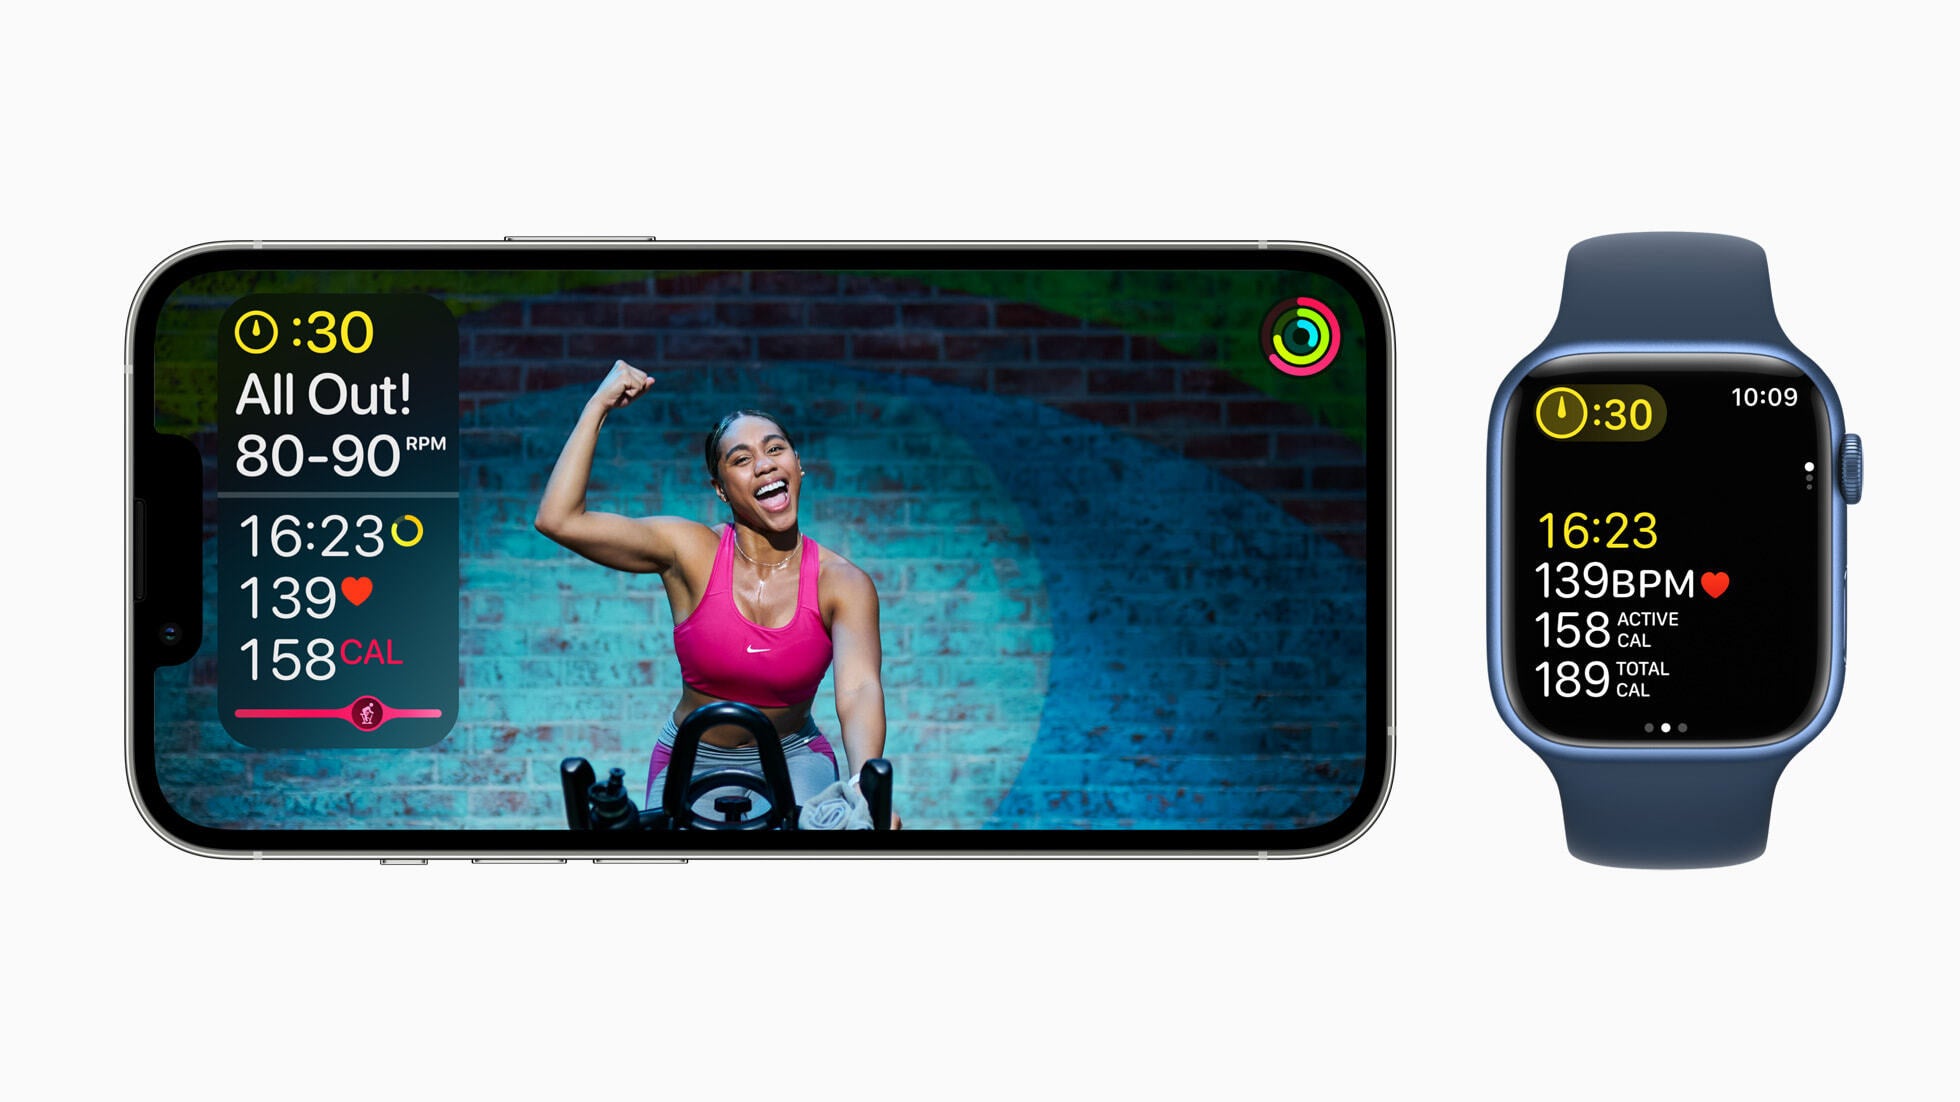 On-screen guidance on the Apple Watch via the Fitness+ Apple workouts is now a thing - Apple’s watchOS 9 is official: new watch faces and arrhythmia tracking